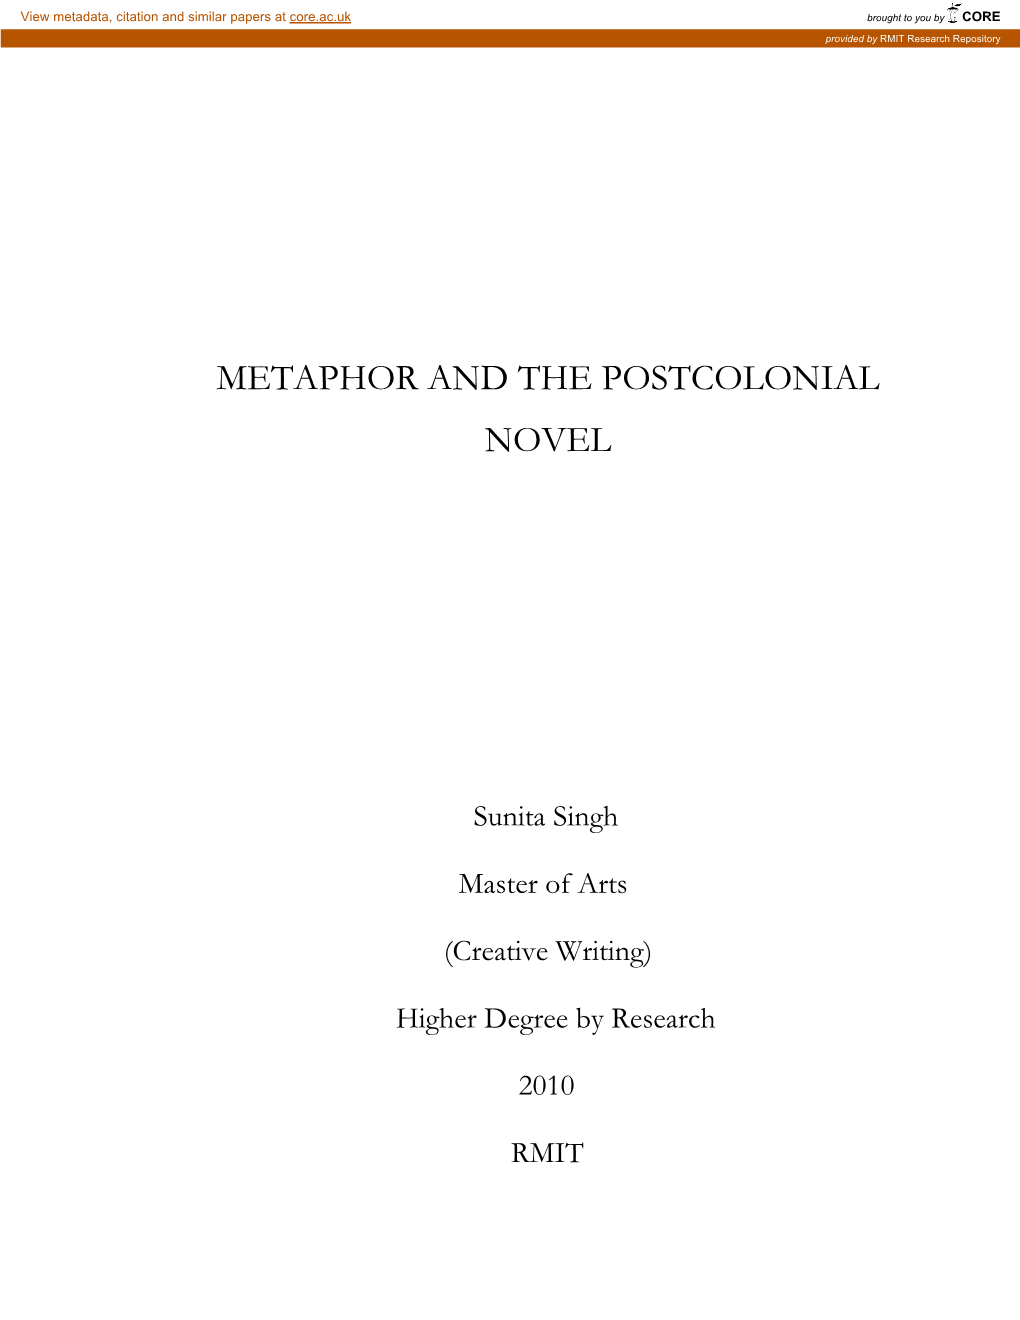 Metaphor and the Postcolonial Novel